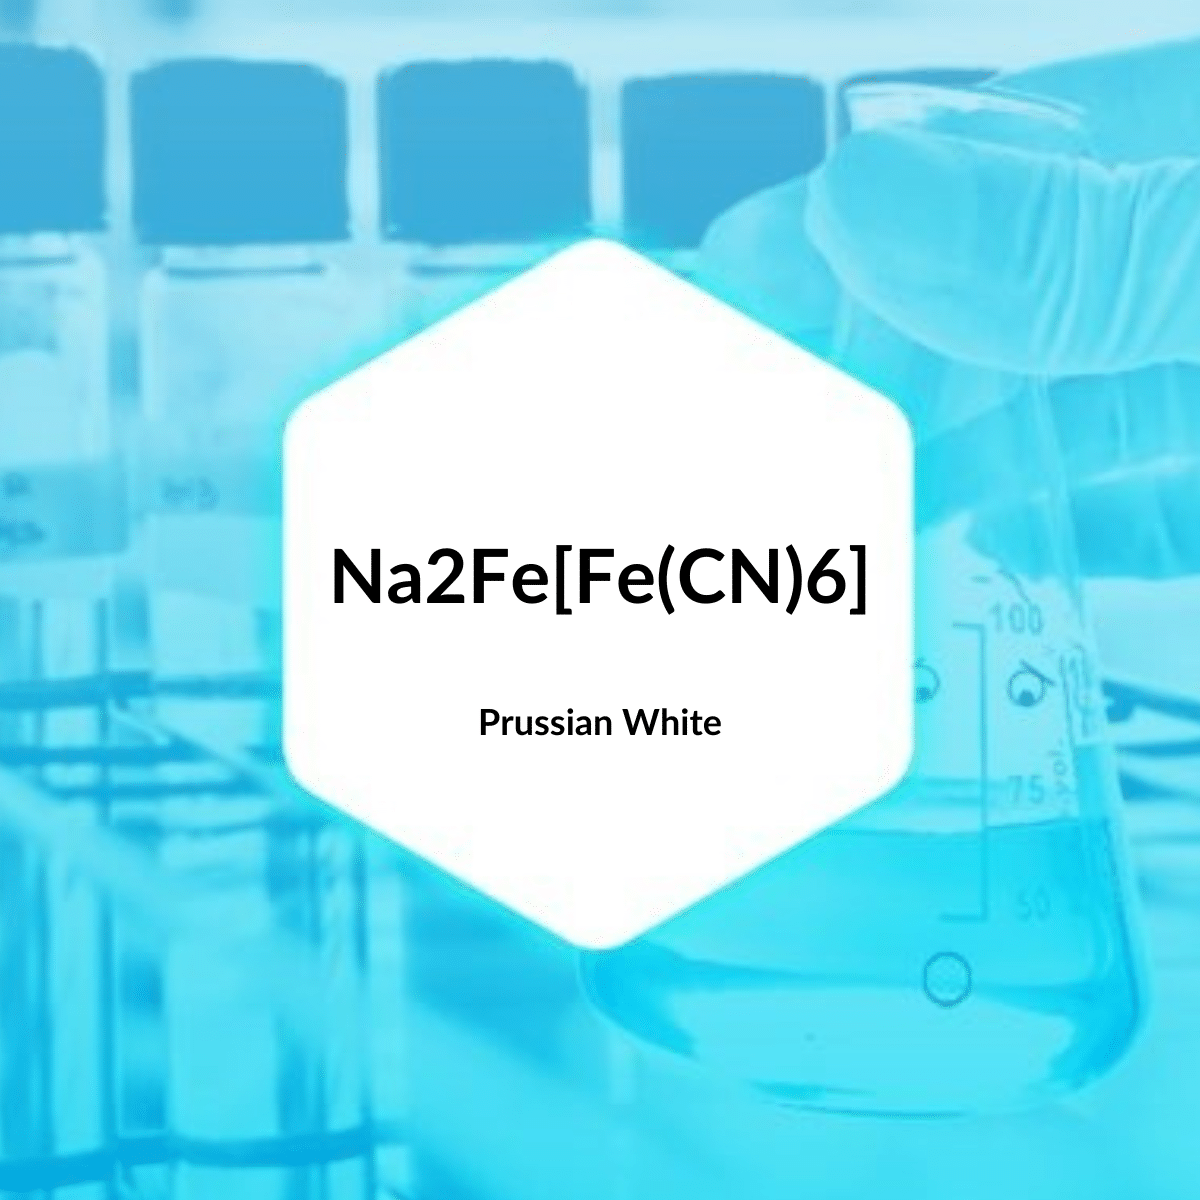 Prussian White Chemical Structure